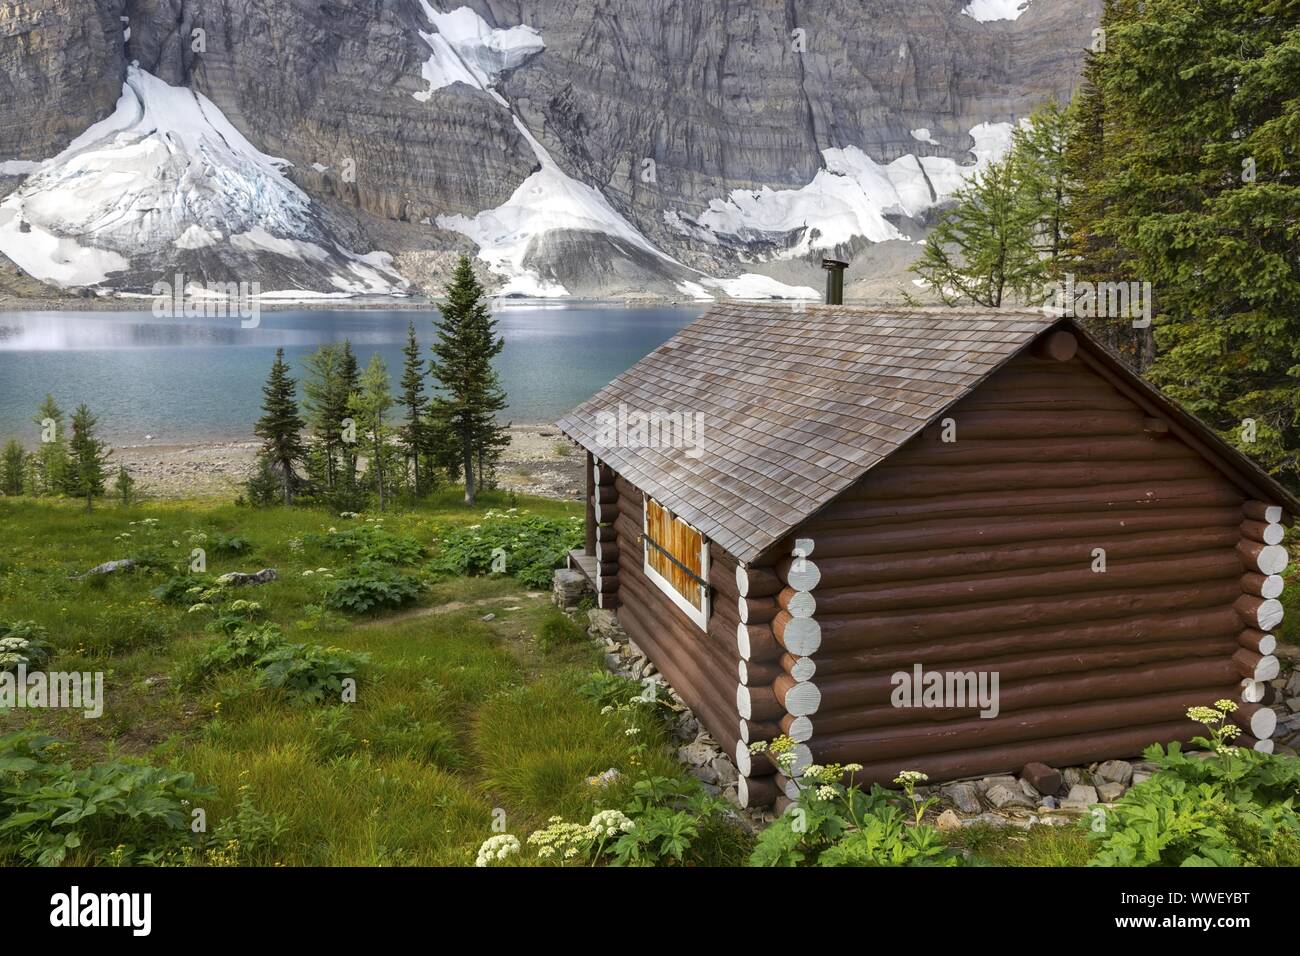 Heritage Landmark Rustic Wooden Log Cabin extérieur. Green Alpine Meadow Floe Lake Rockwall Hiking Trail Parc national Kootenay Rocheuses canadiennes Banque D'Images